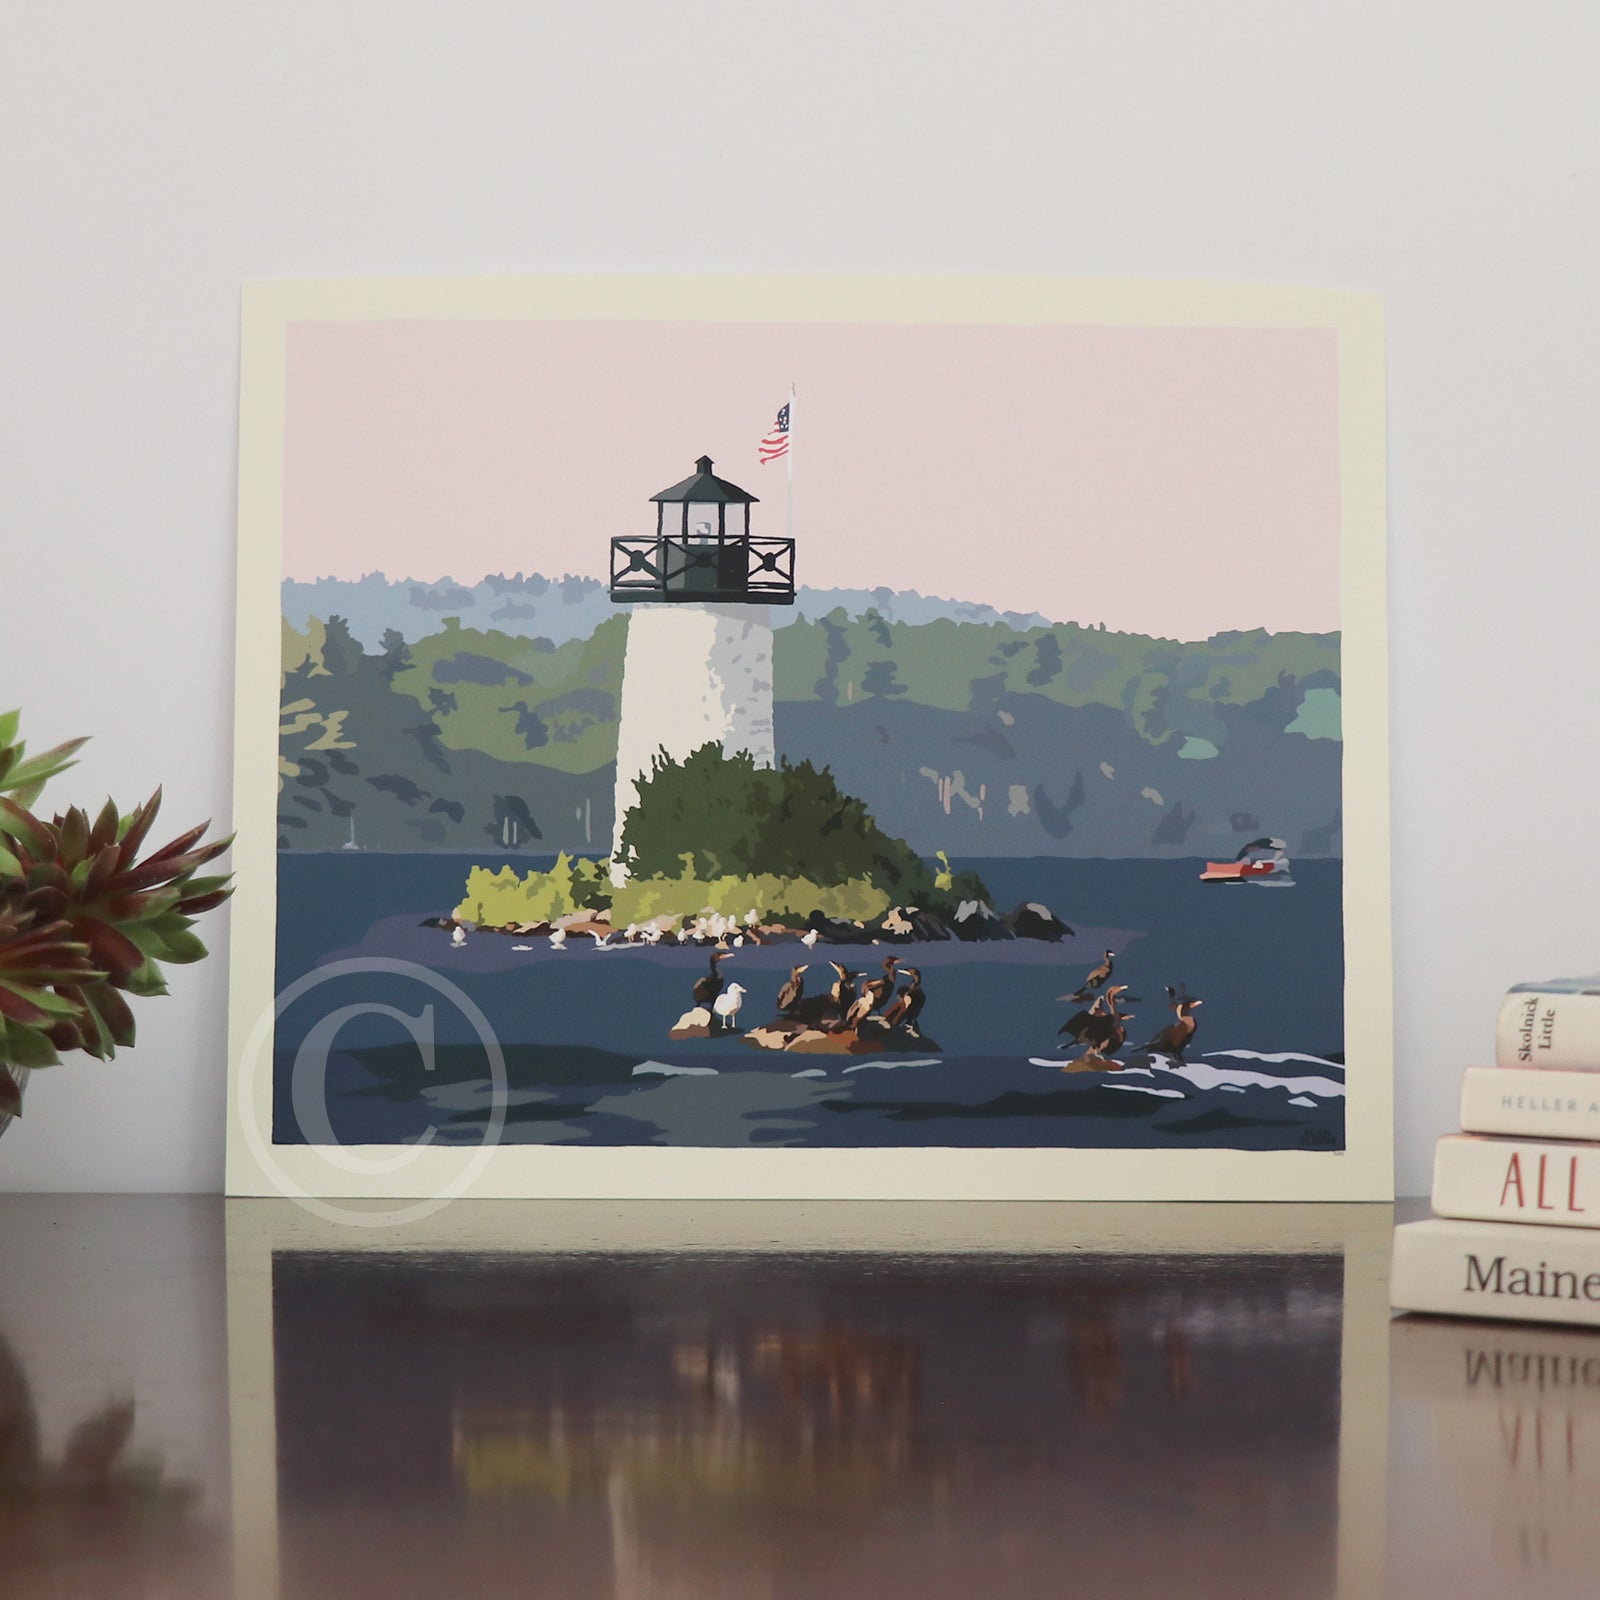 Sunset at Ladies Delight Lighthouse Art Print 8" x 10” Horizontal Wall Poster By Alan Claude - Maine